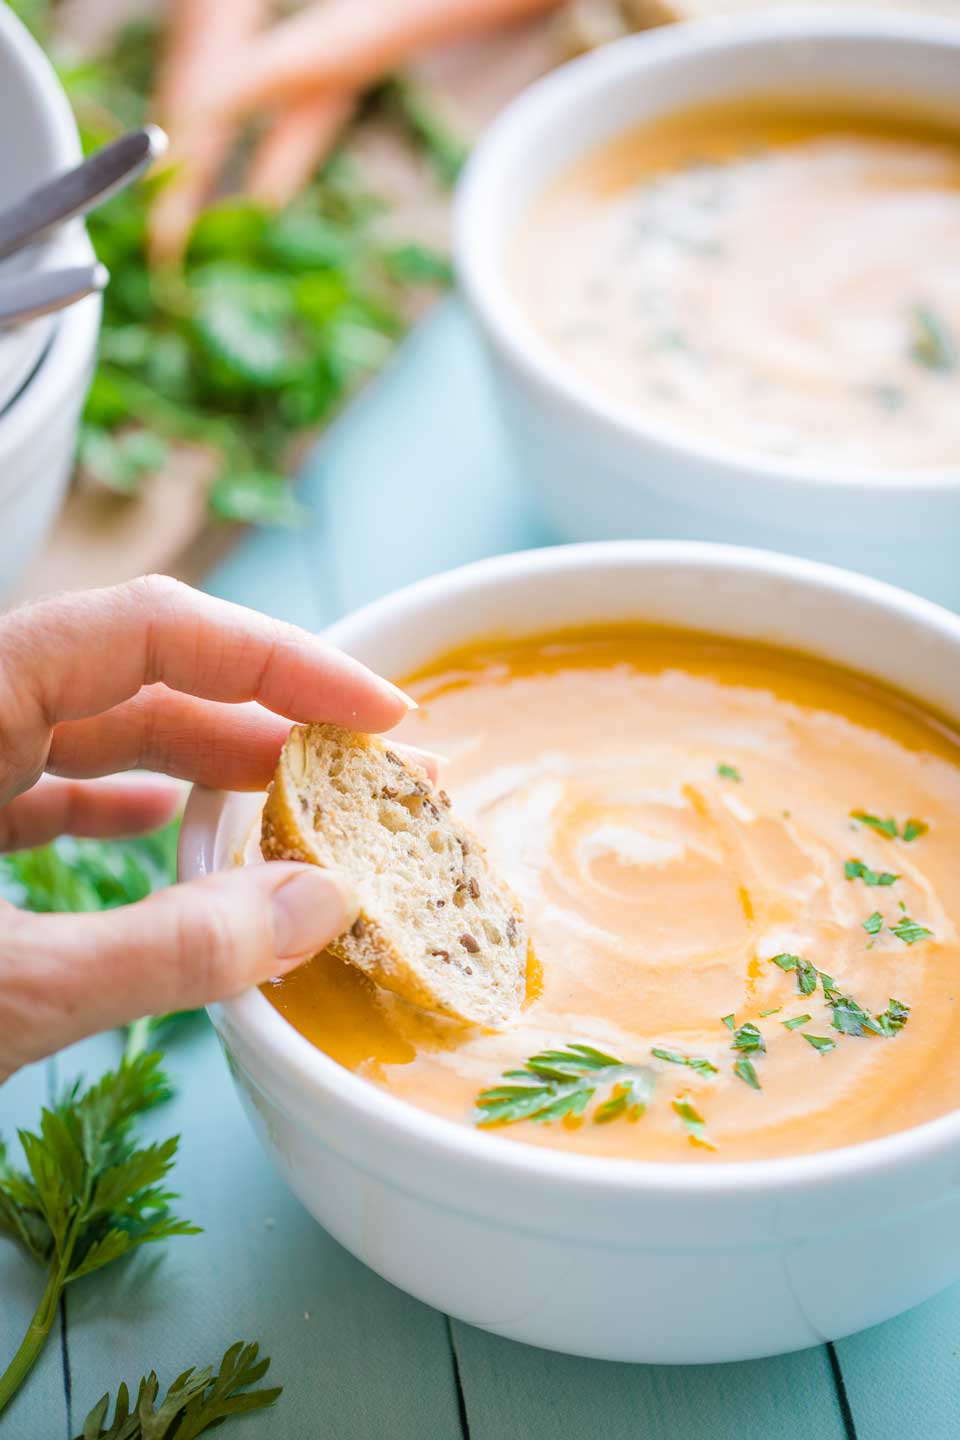 hand dipping a slice of grainy bread into a bowl of the sweet potato soup